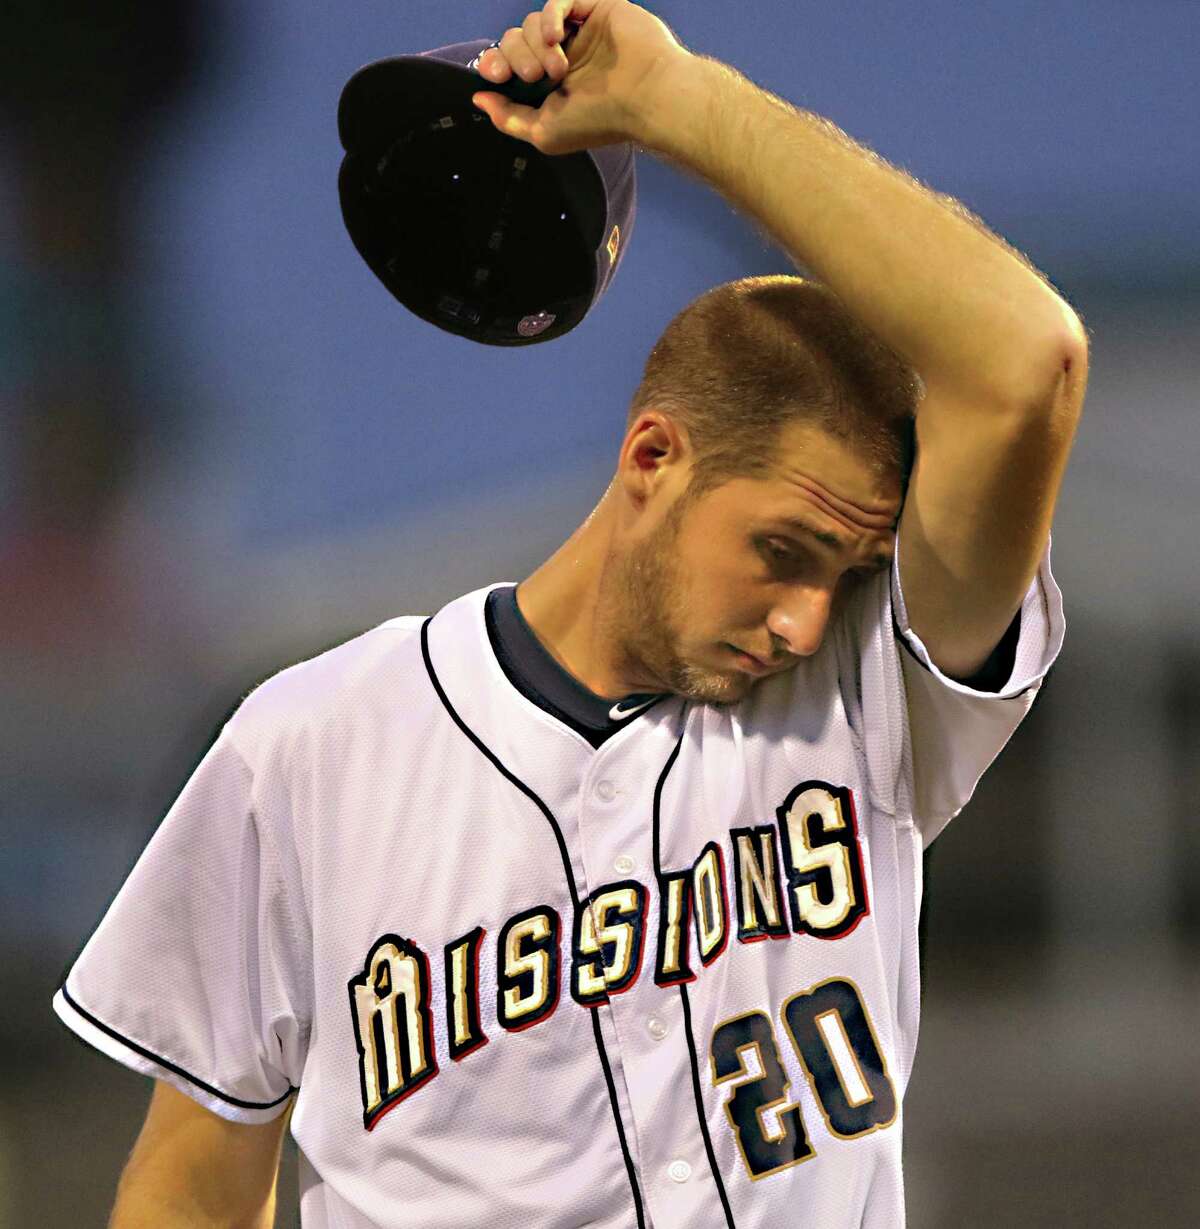 Justin Hancock leaves the mound at the end of fourth inning during the Texas League All-Star Game at Whataburger Field in Corpus Christi.